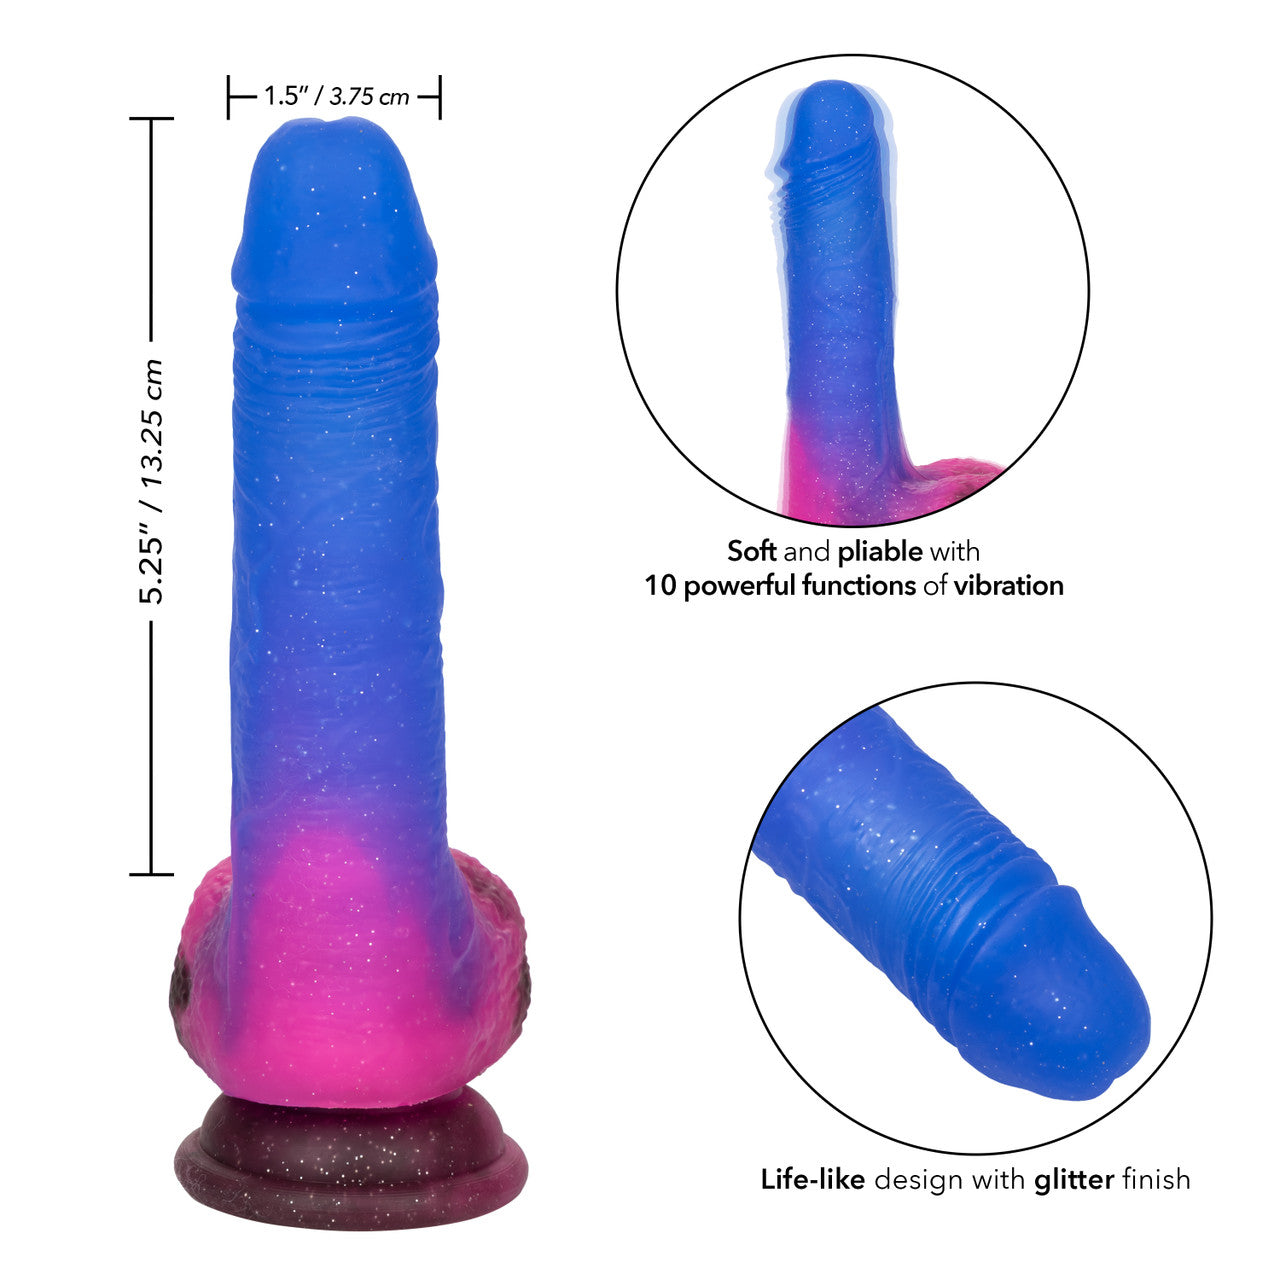 Blue to Pink ombre glitter finish dong with balls and suction cup base. Life-like shaft texture and realistic tip head. Diagram showing dimensions, soft and pliable with 10 powerful functions of vibration. Life-like design with glitter finish.